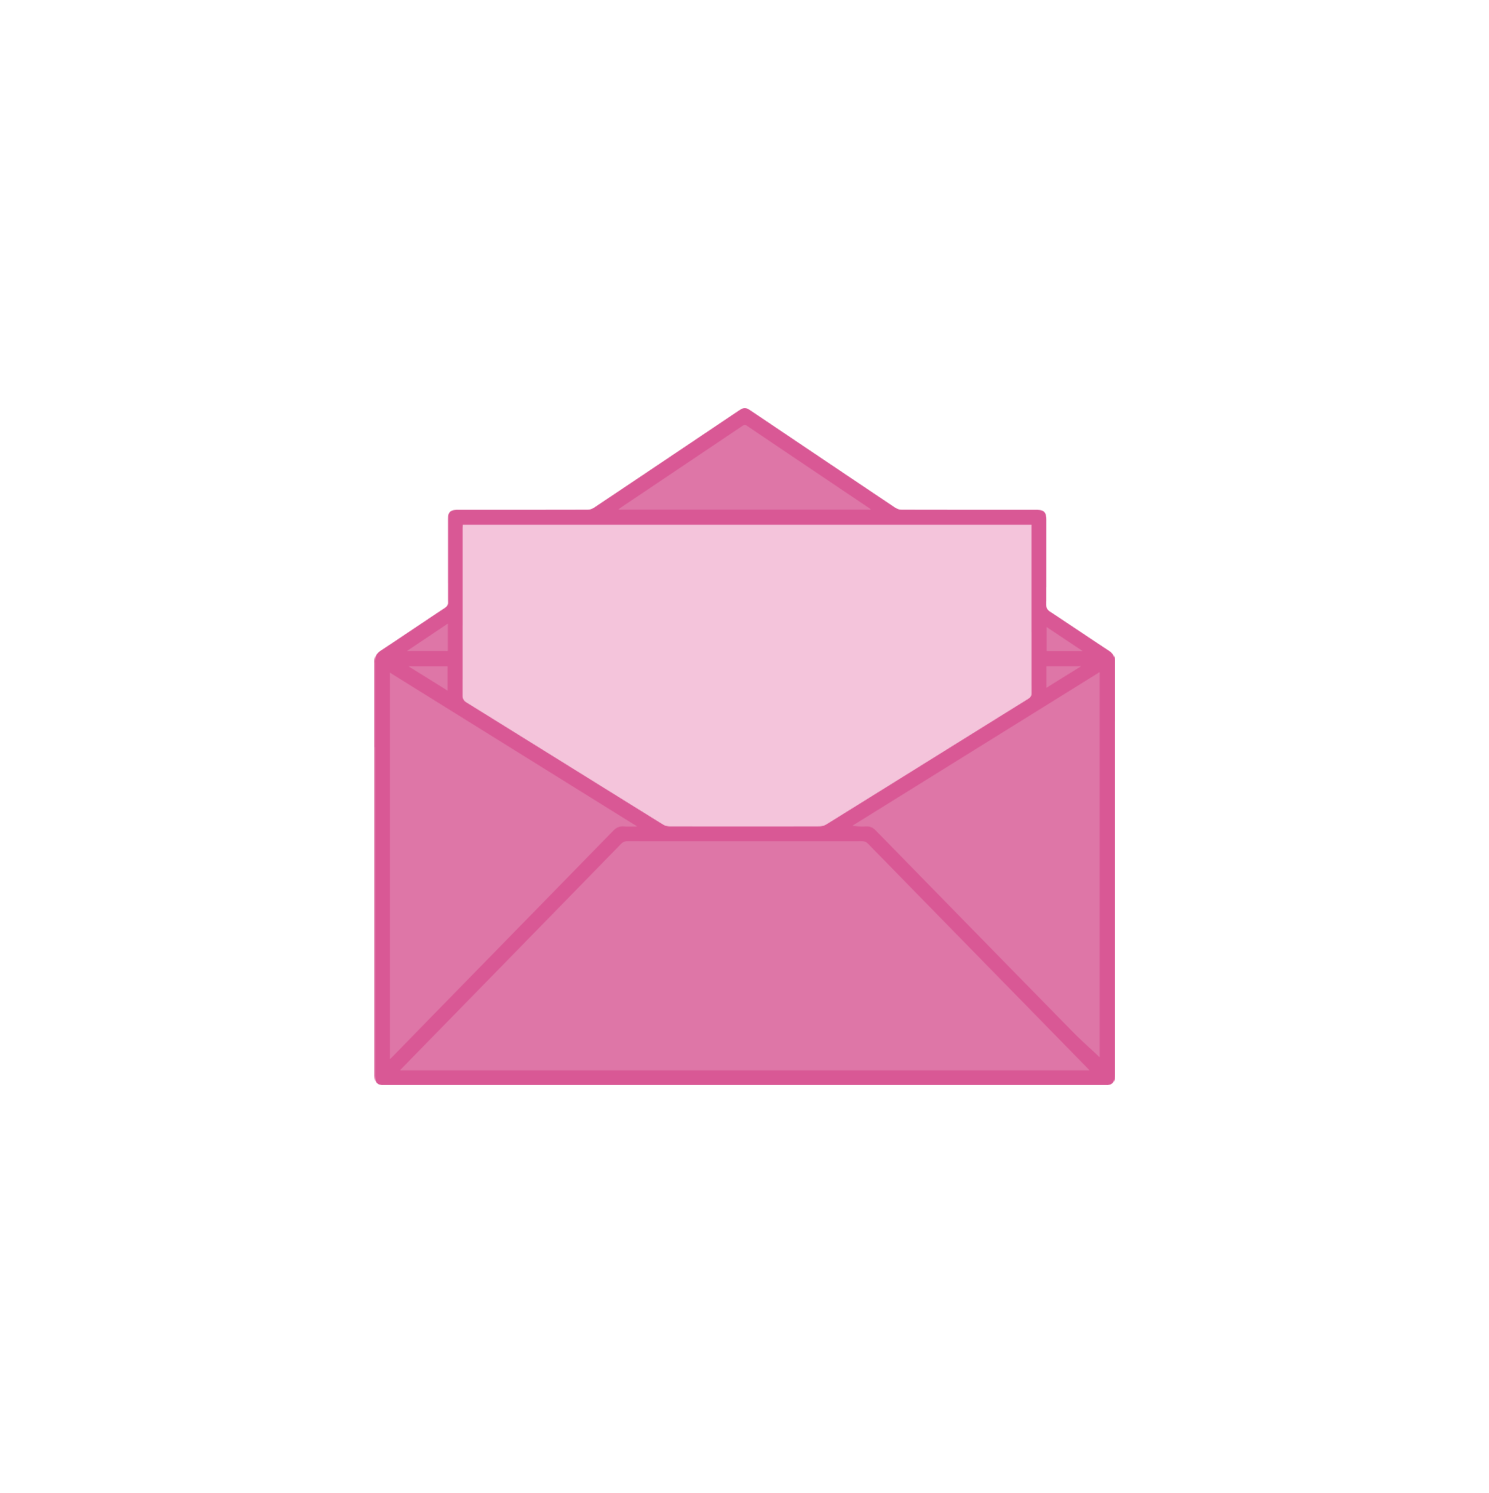 A drawing of an open pink envelope containing a single sheet of pink paper.